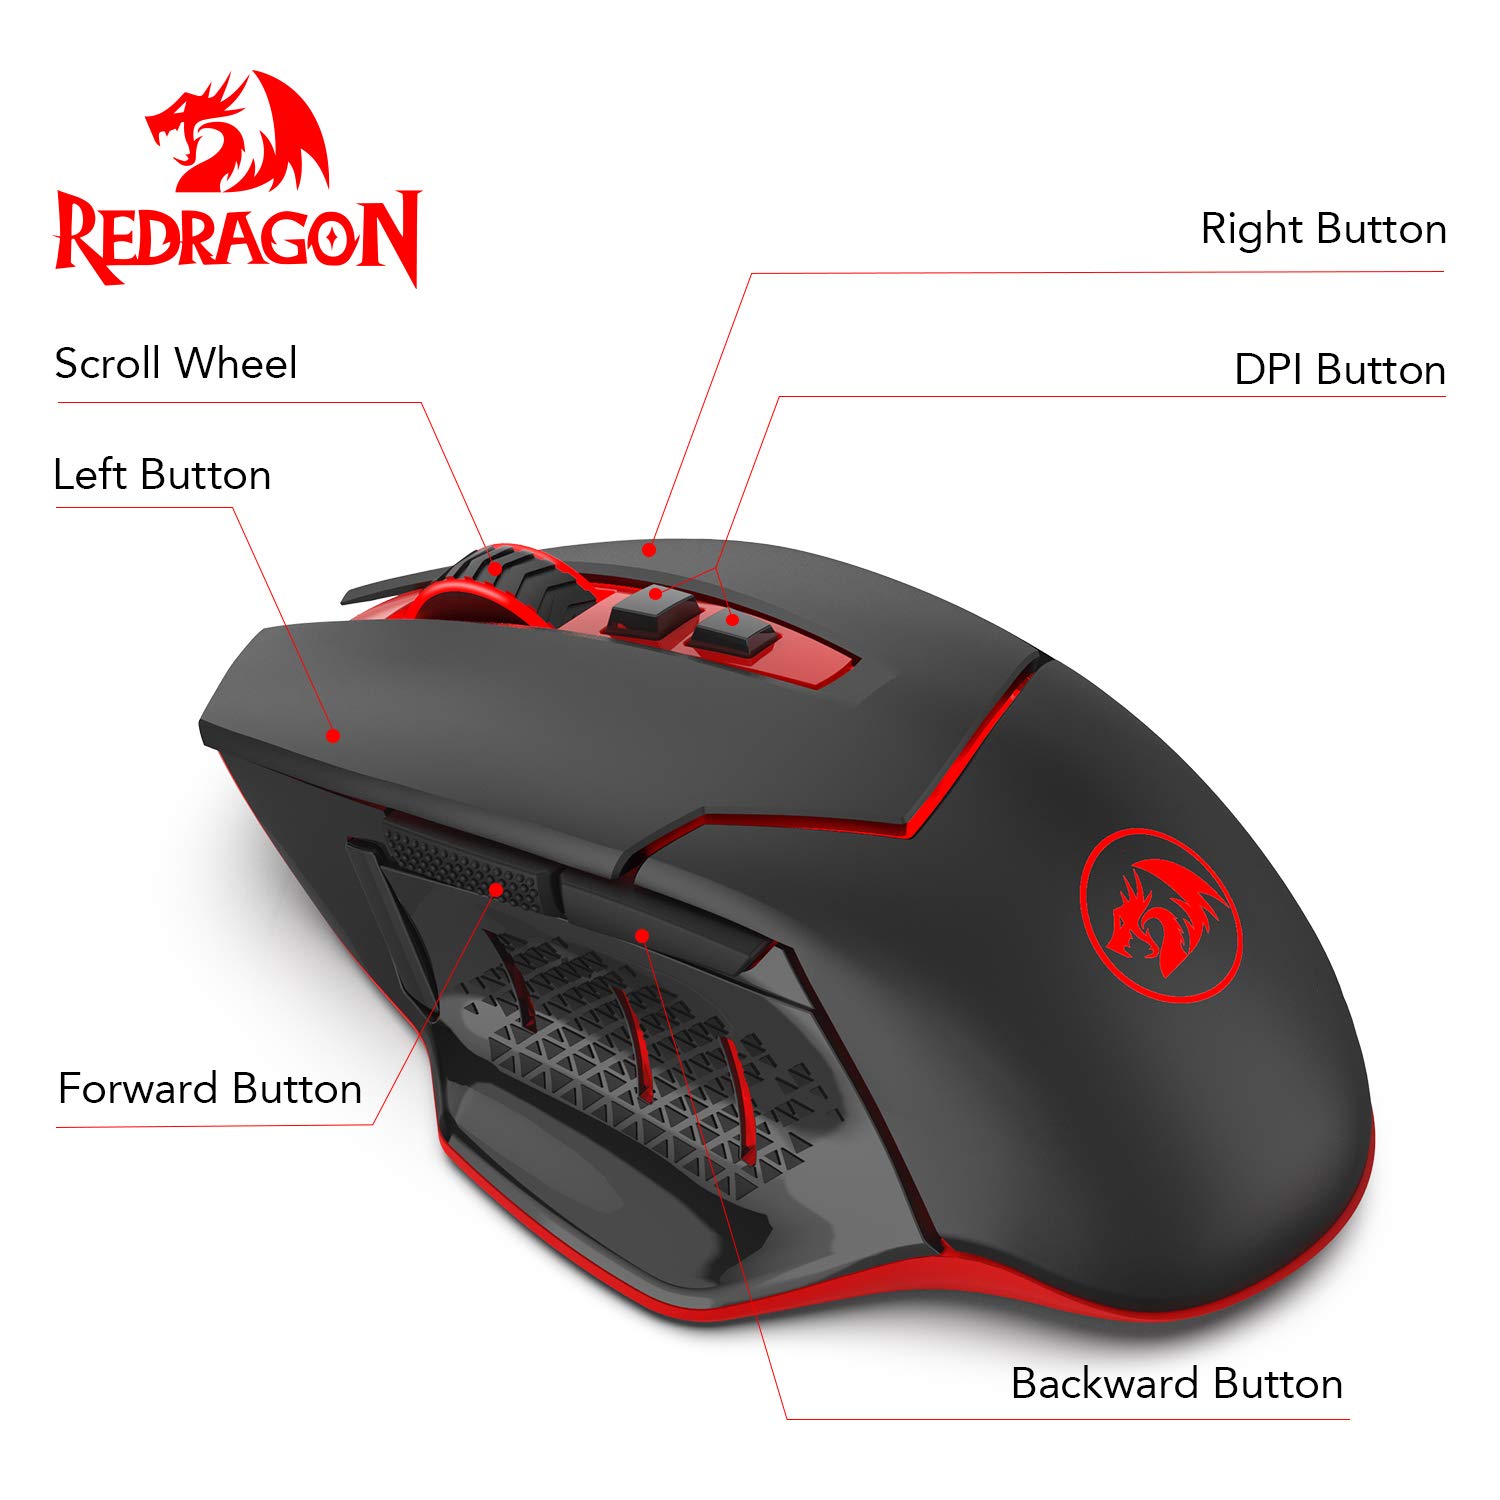 Redragon M690-1 Wireless Gaming Mouse with DPI Shifting, 2 Side Buttons, 2400 DPI, Ergonomic Design, 8 Buttons-Black